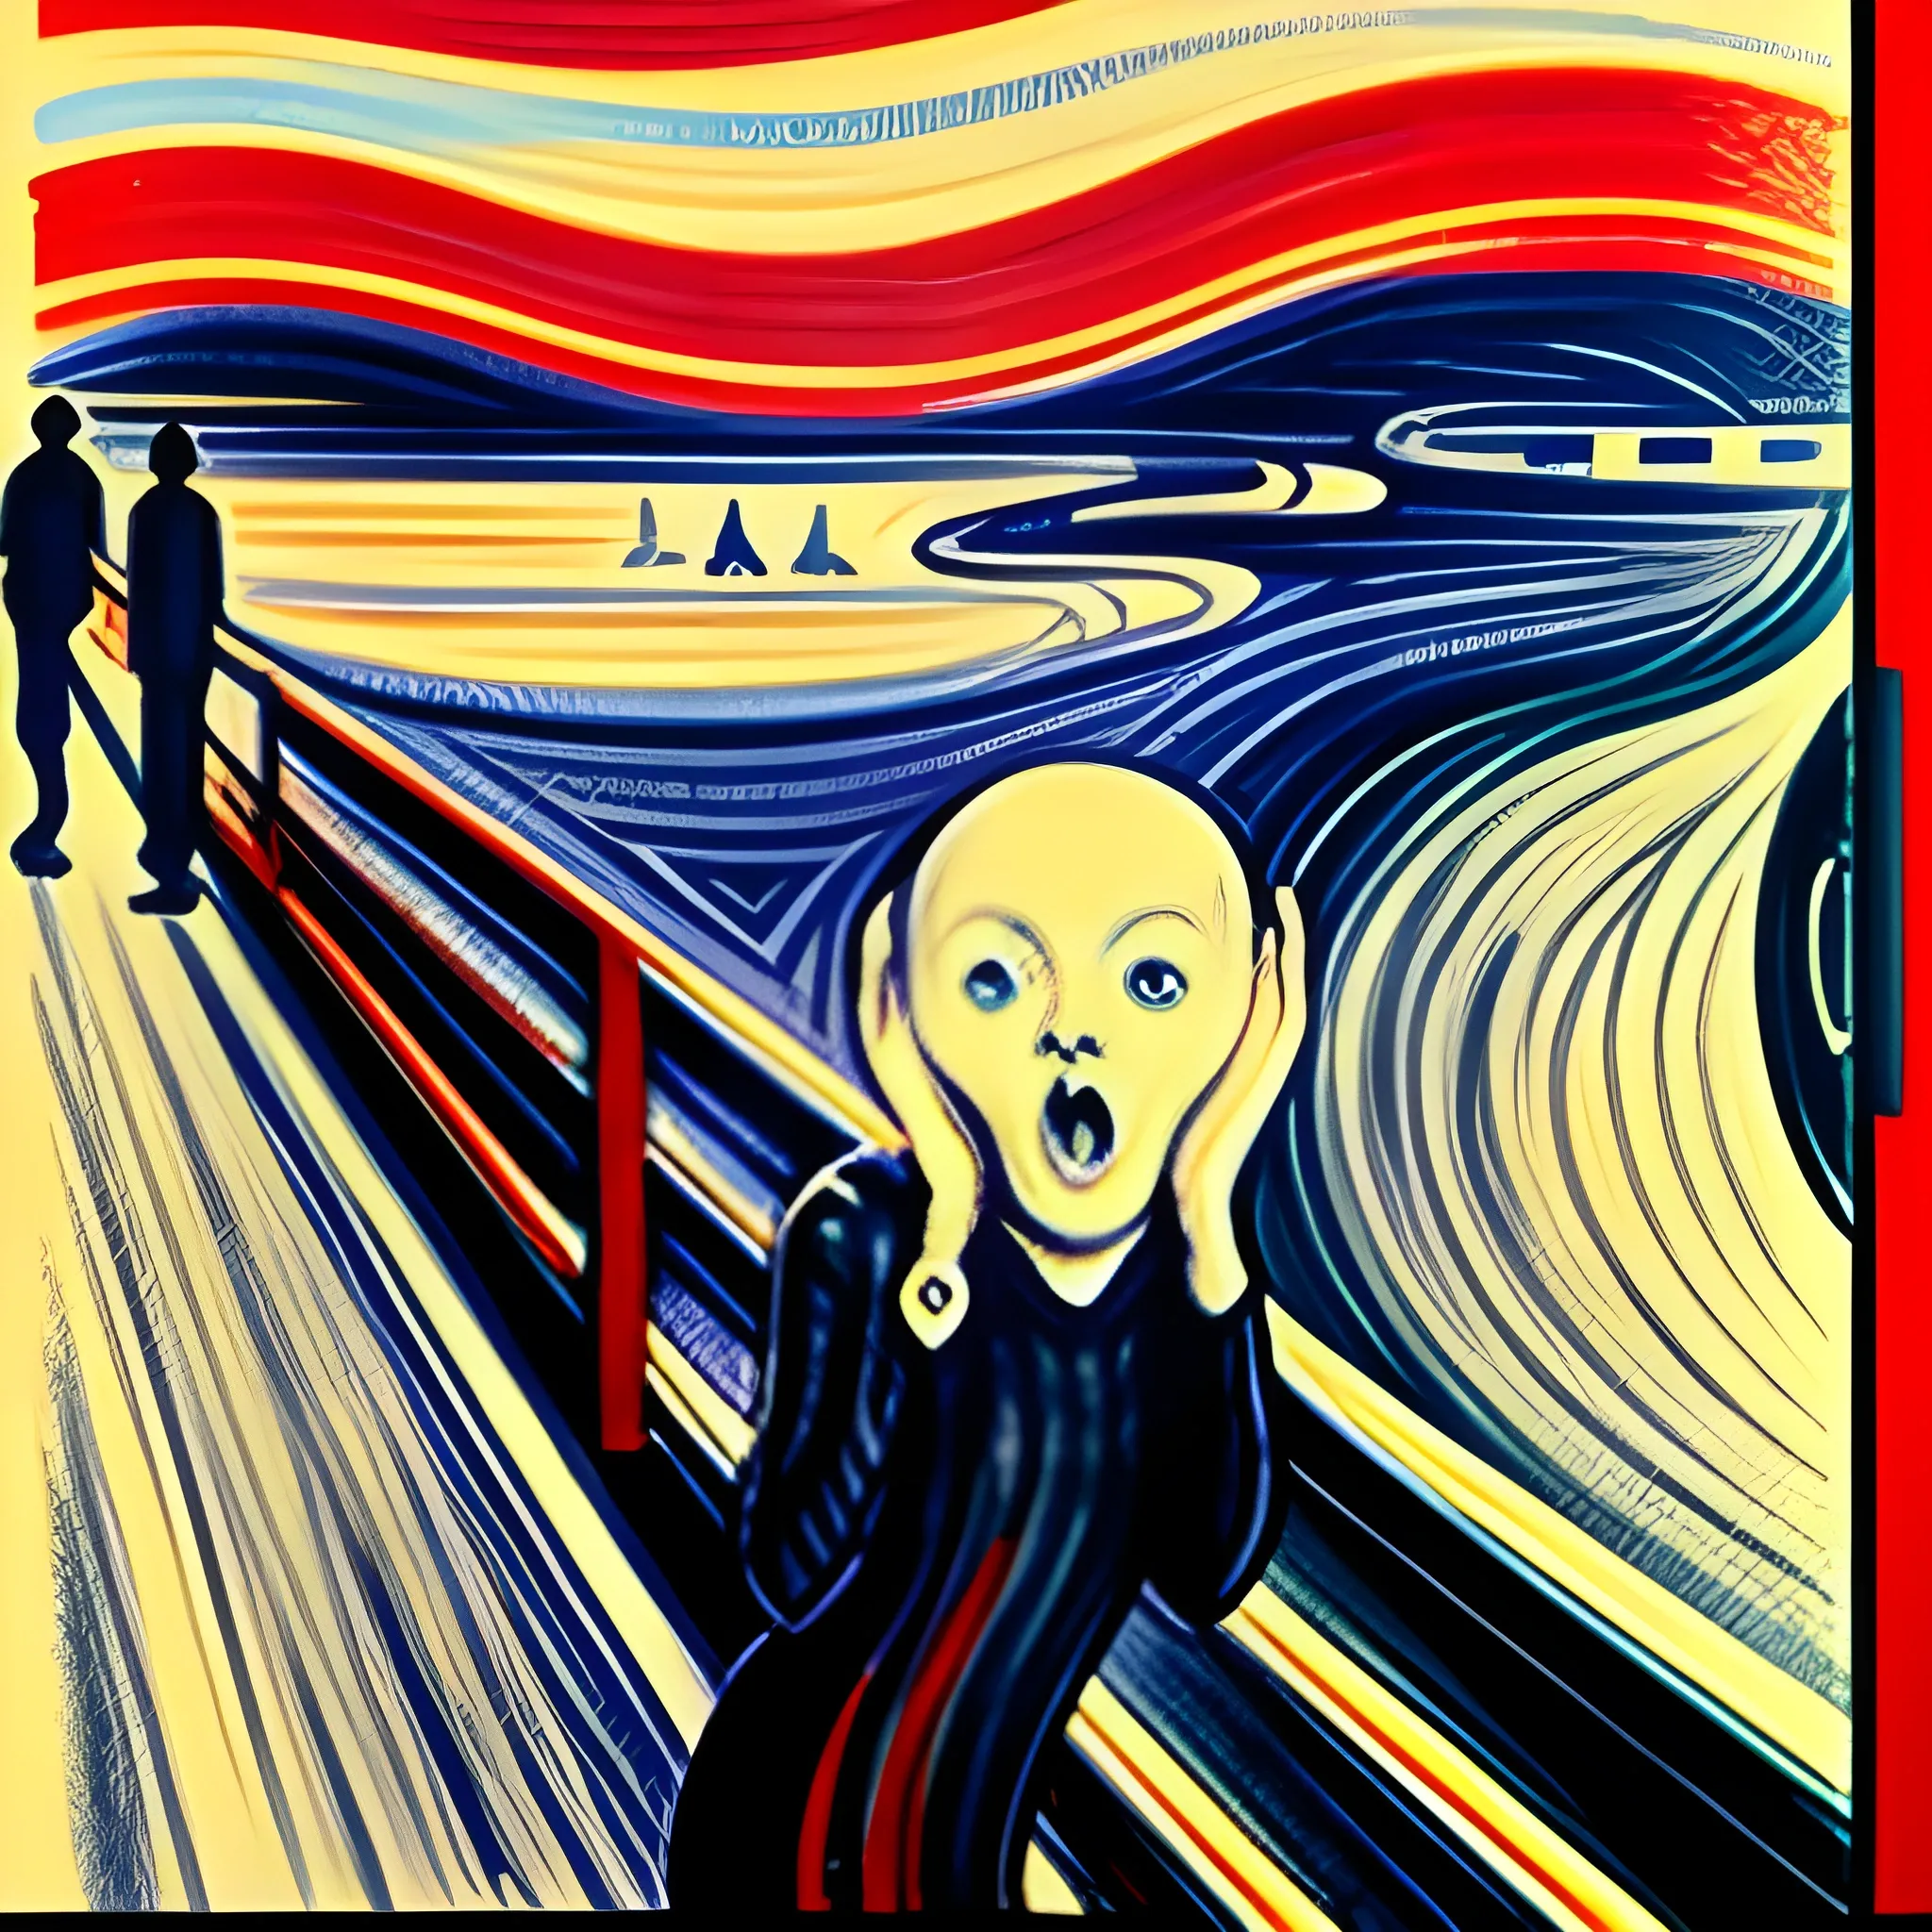 The Scream by Edvard Munch in the future